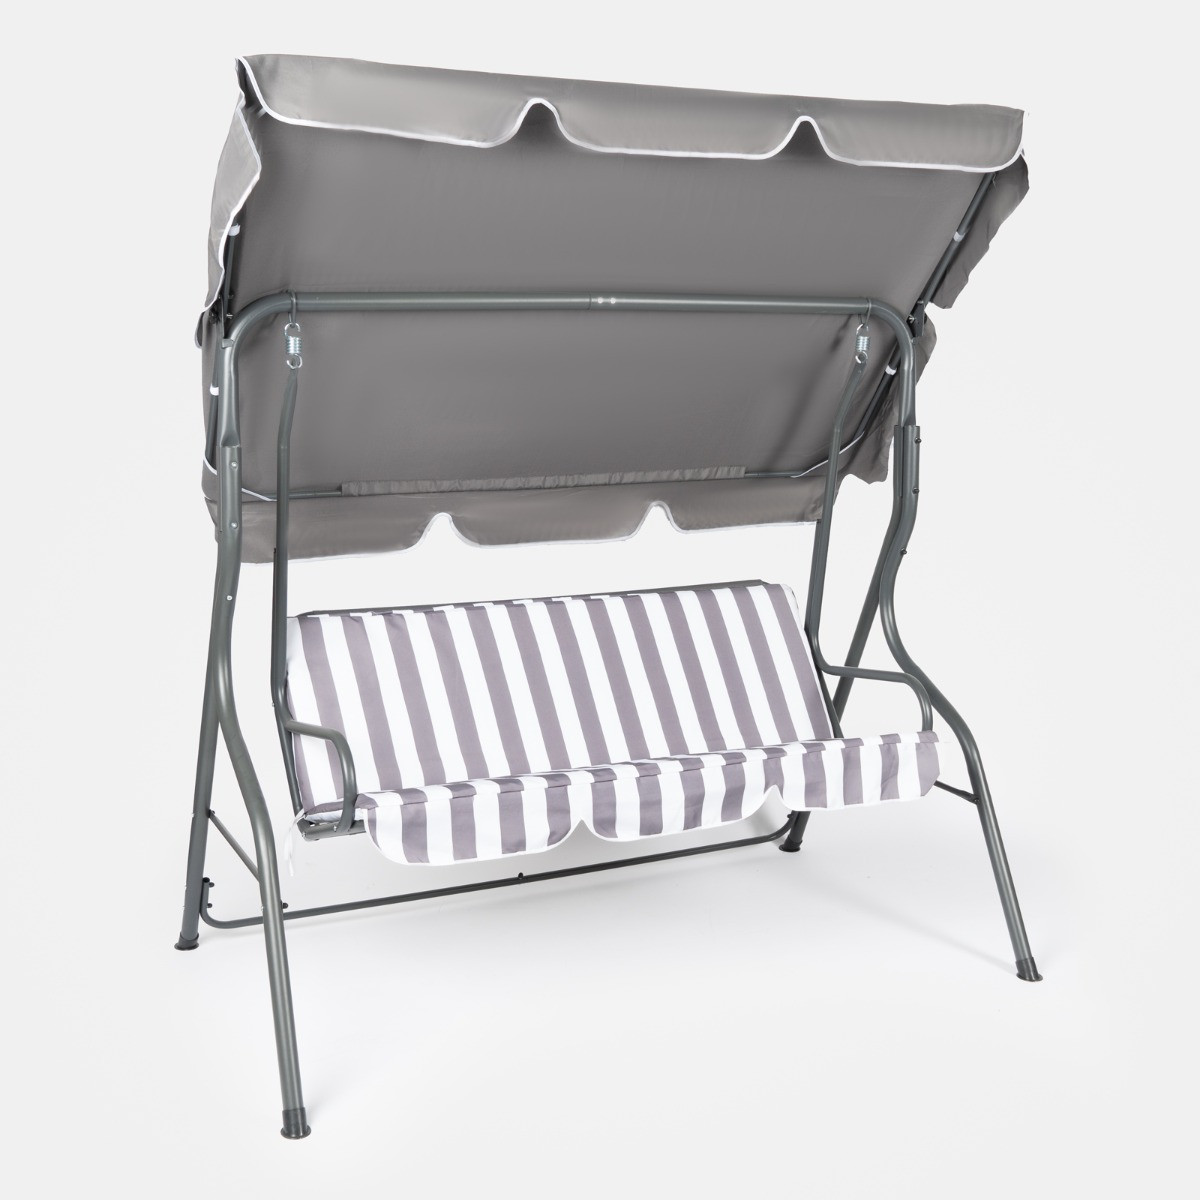 OHS 3 Seater Swing Bench With Canopy - Grey / White Stripe>